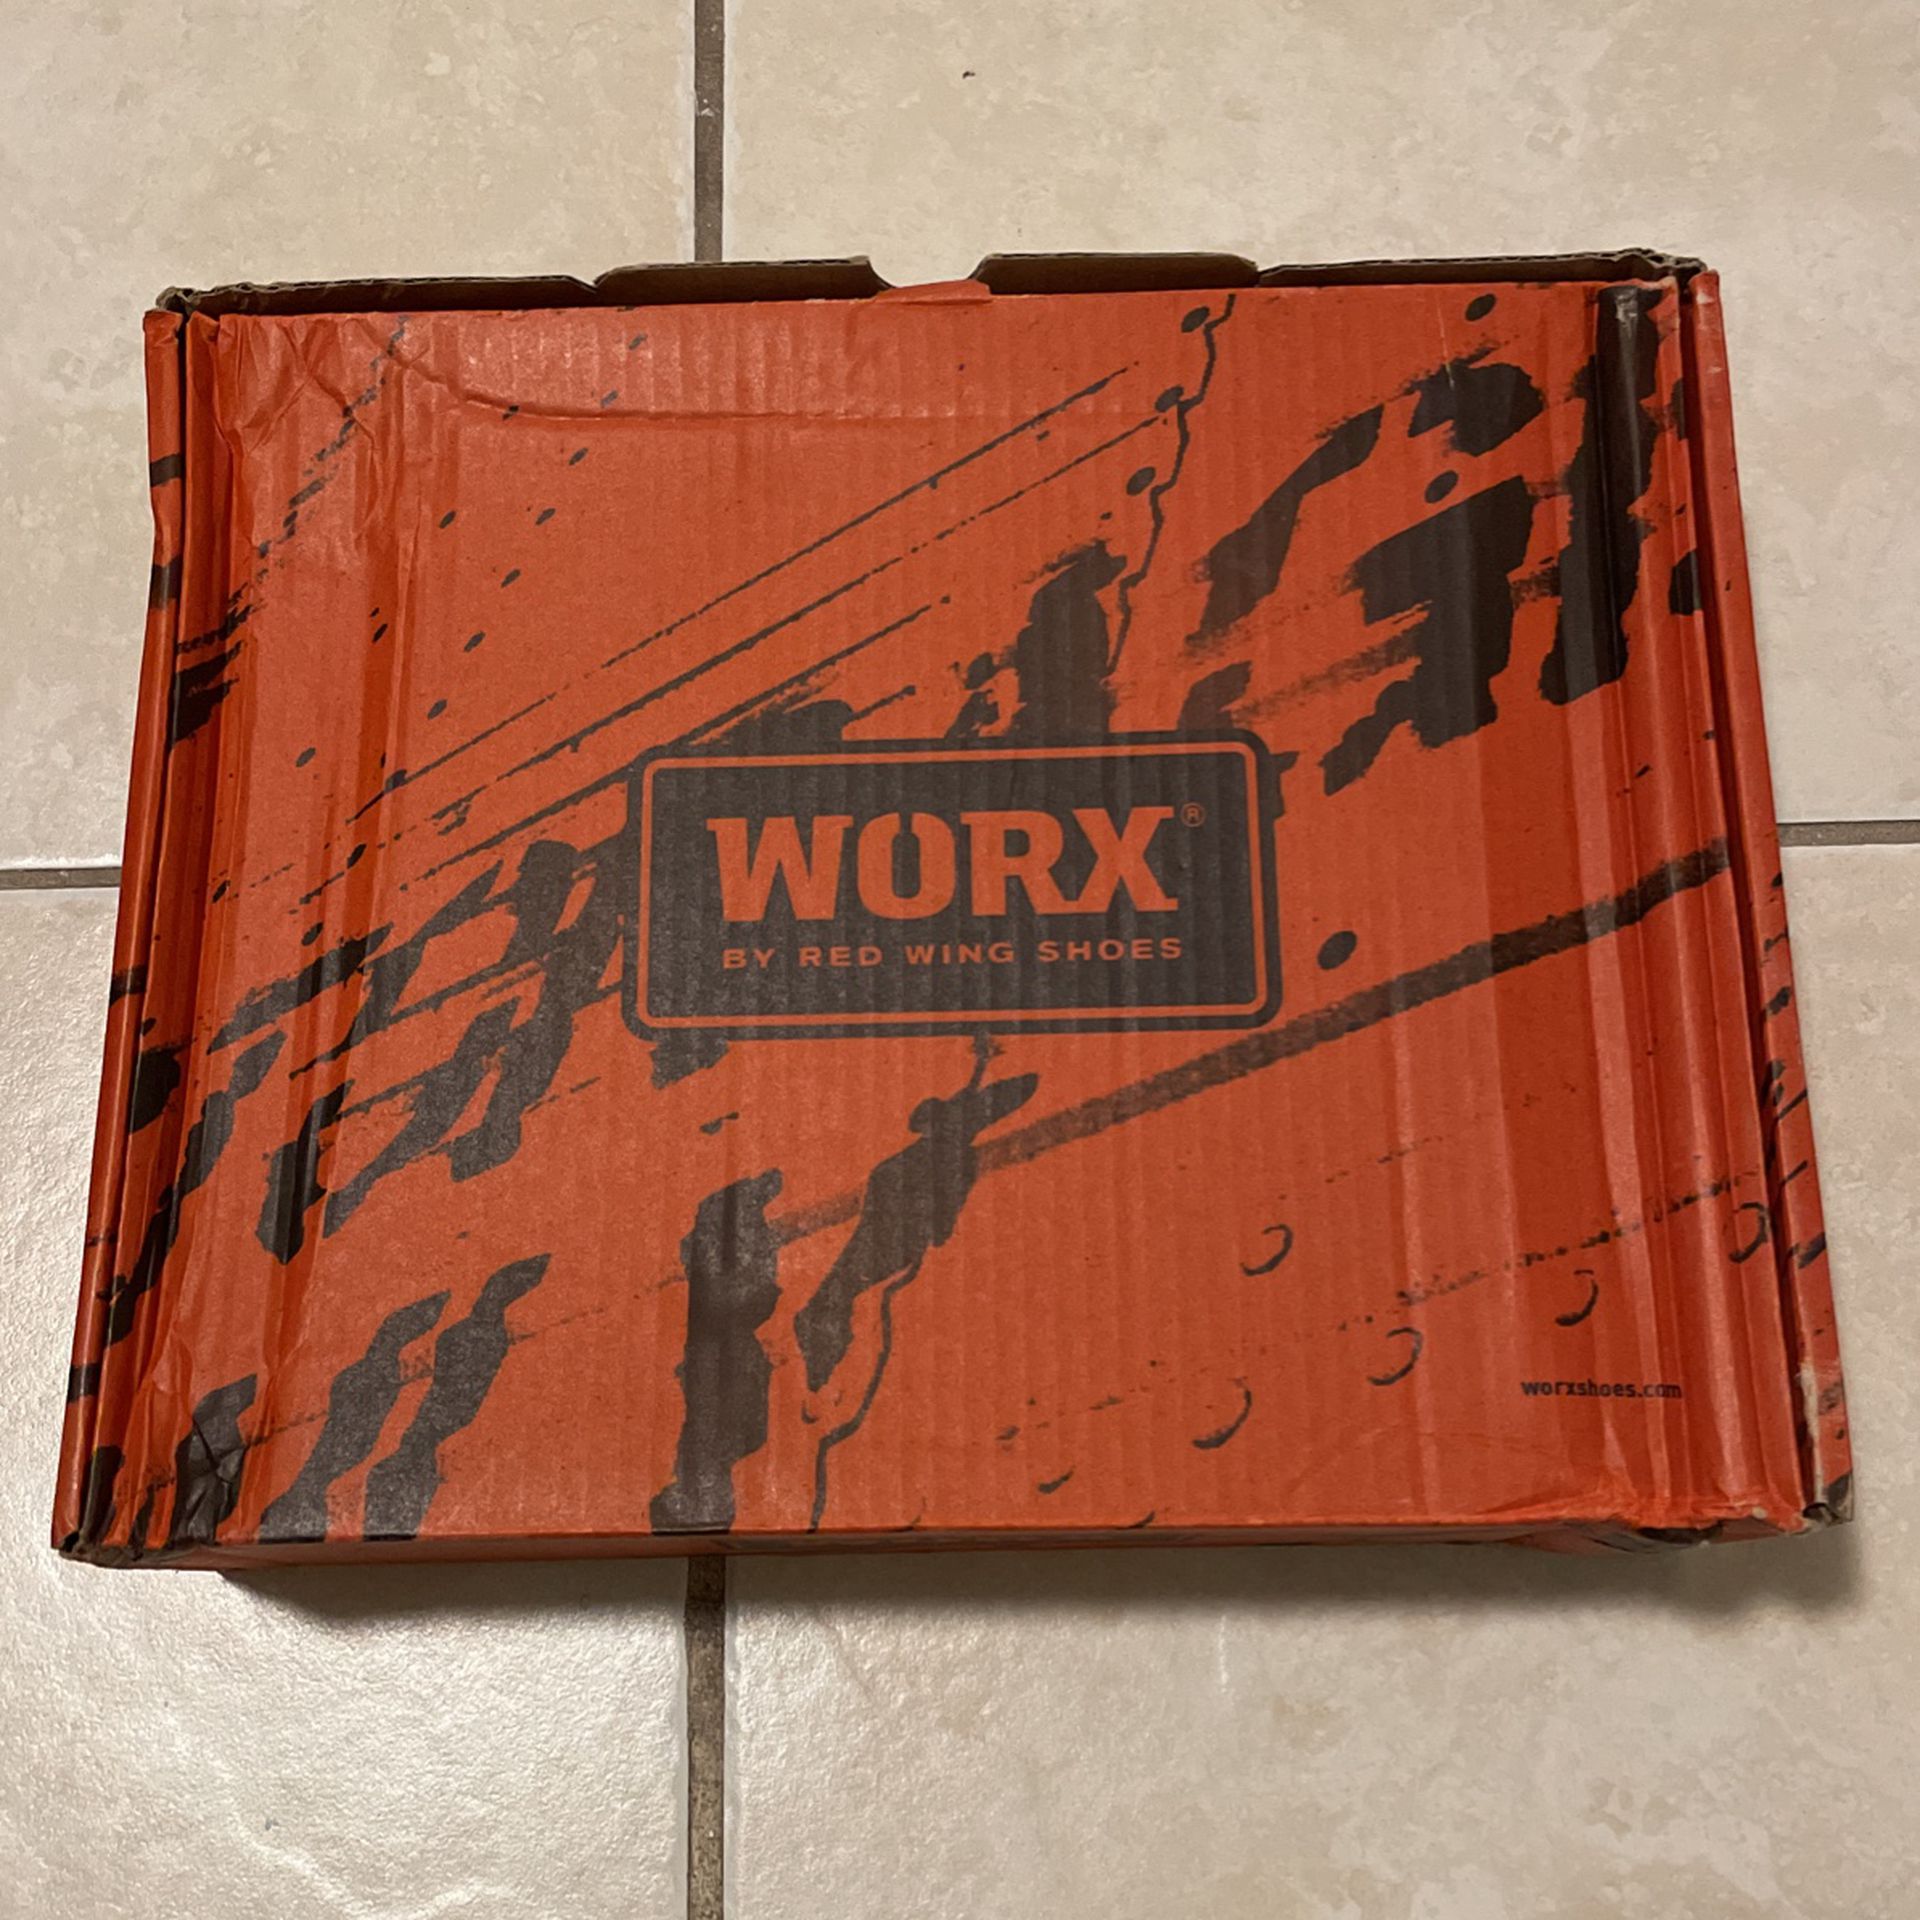 Worx (Red Wing) Working Boots